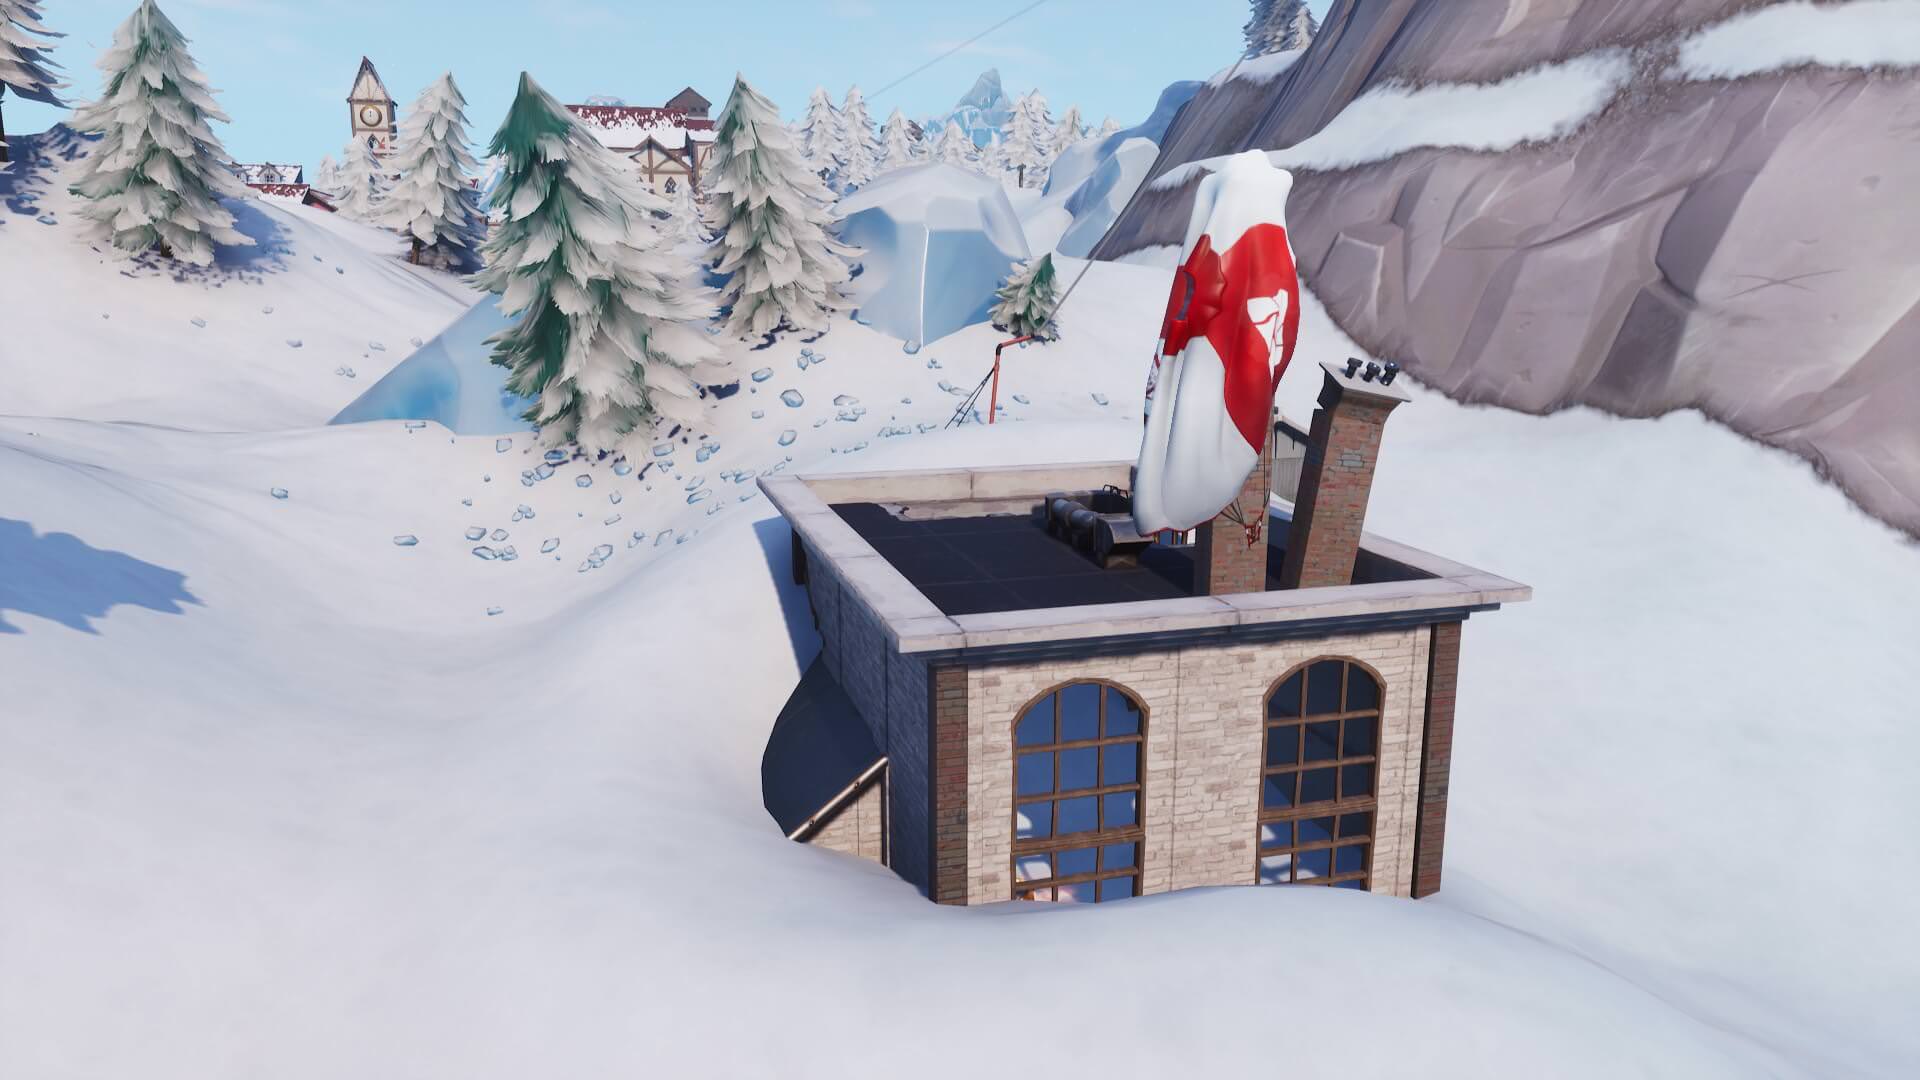 Flush Factory Buried in Snow